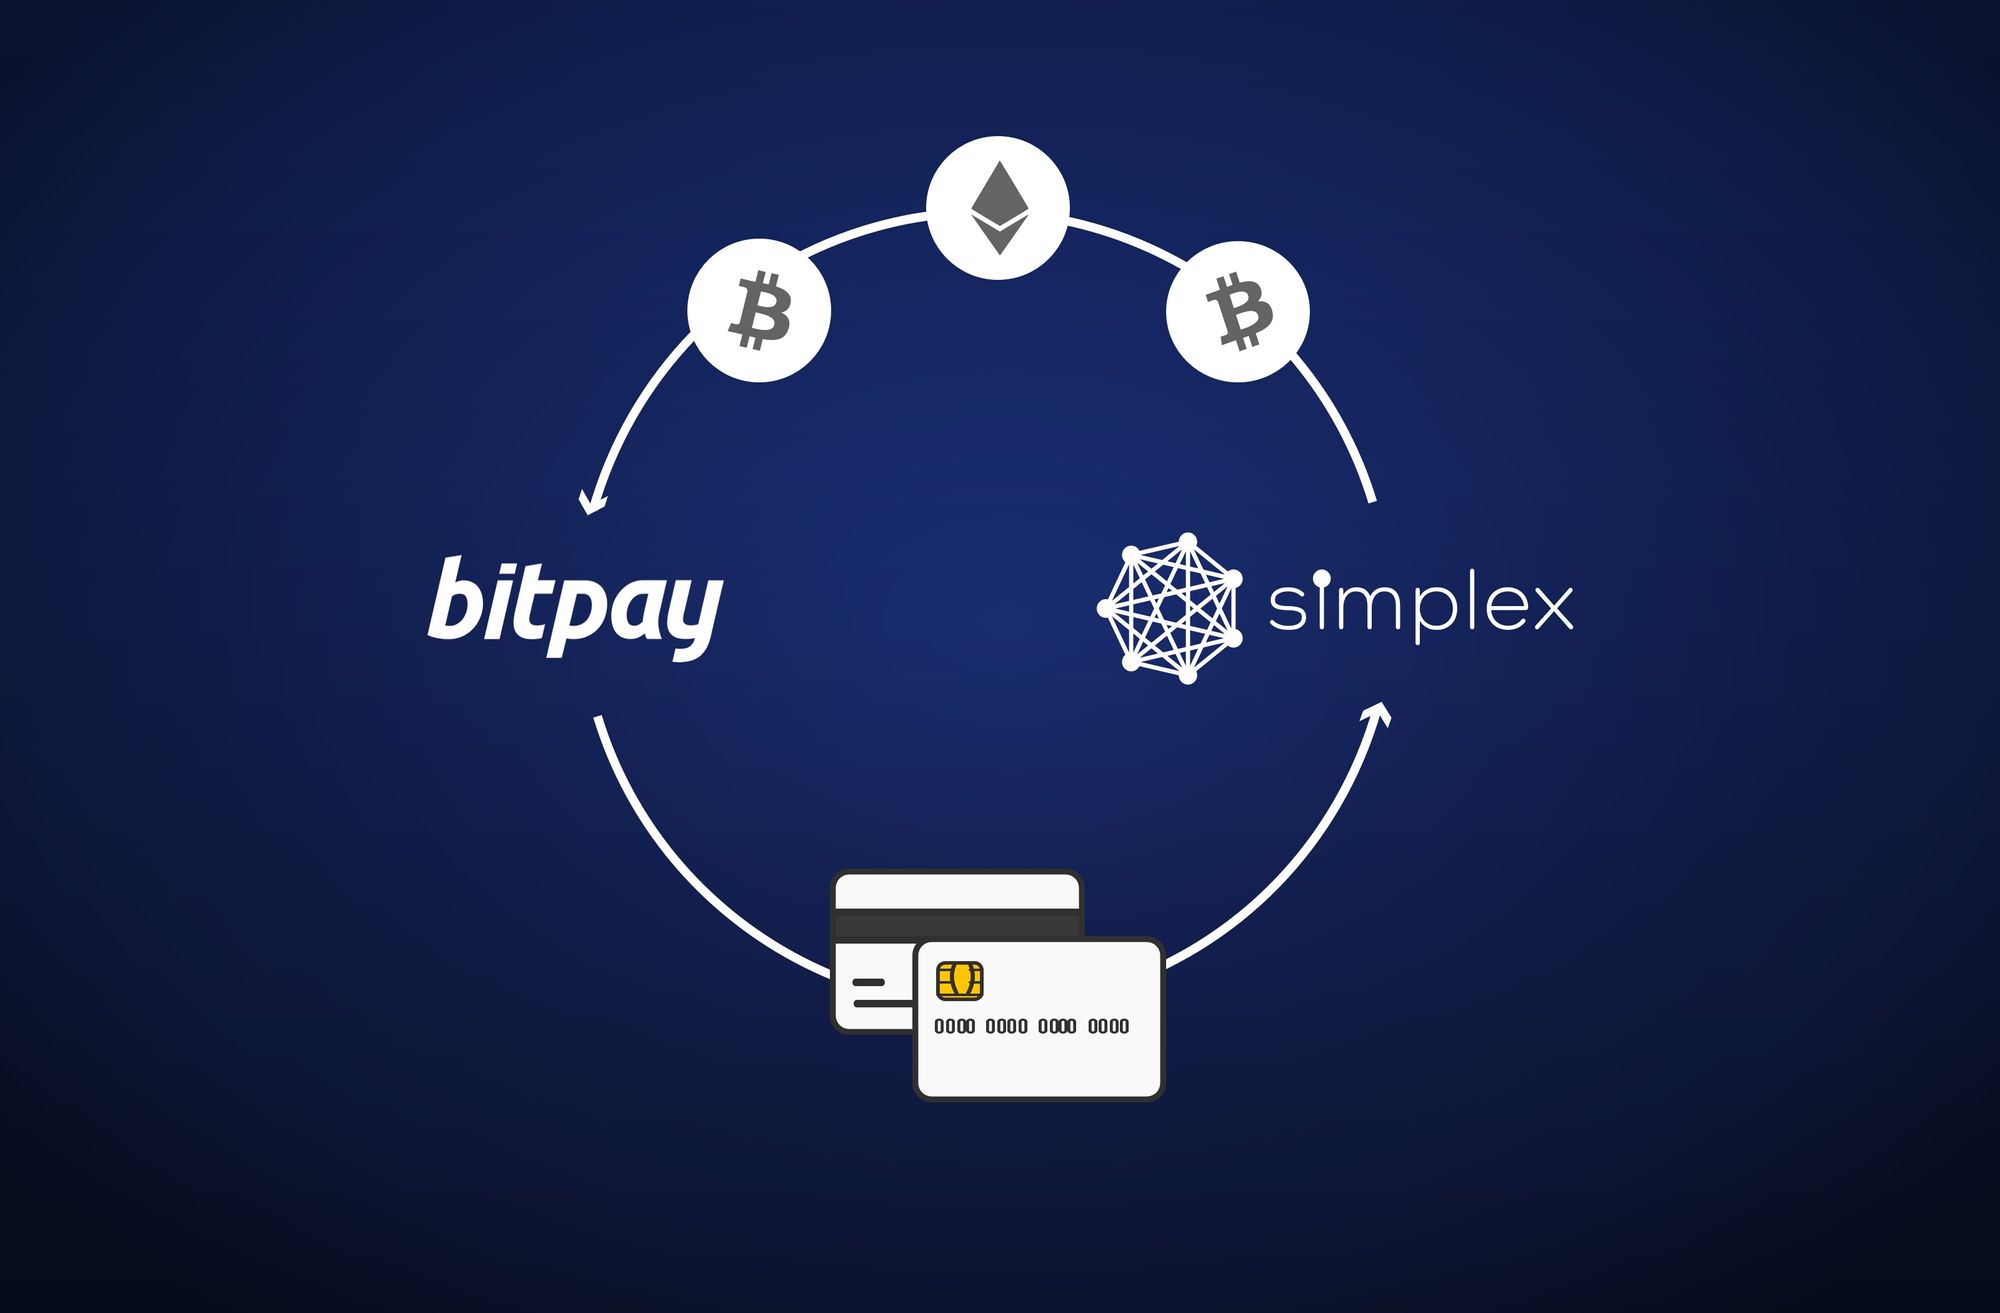 Buy Bitcoin in the BitPay App